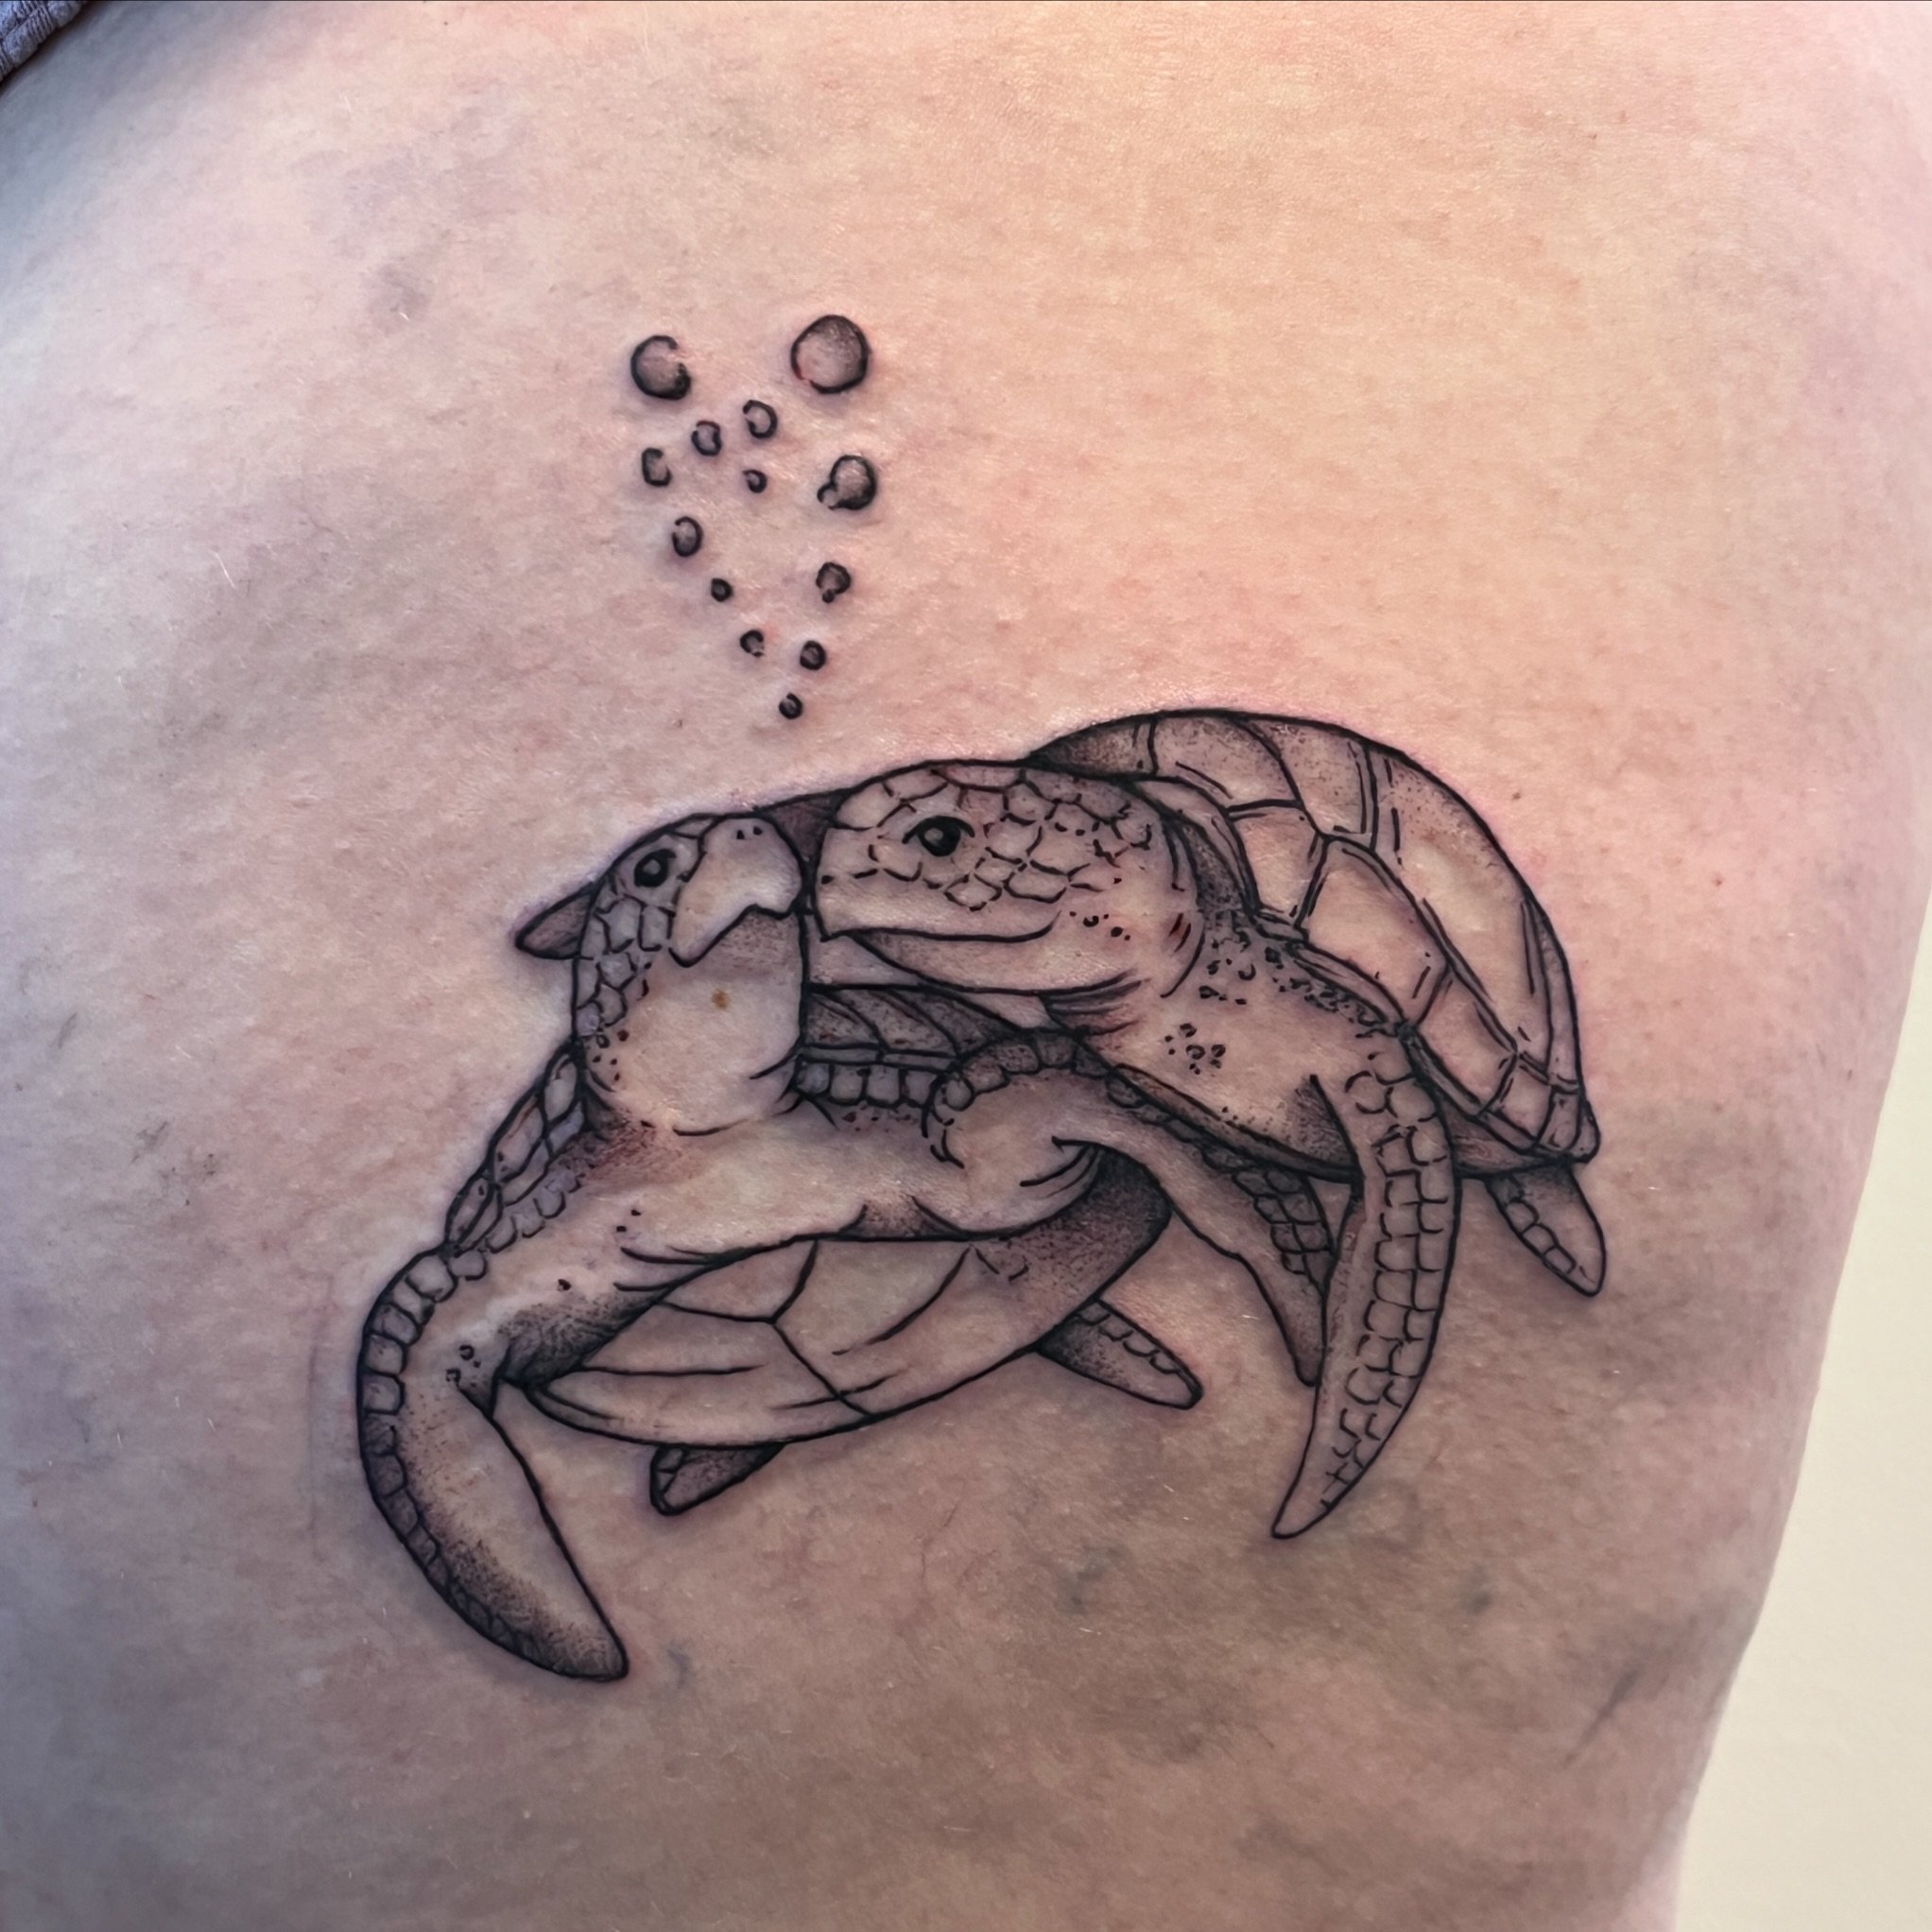 sea turtle sweethearts for abby 🐢💕 wonderful having you back in, it was great catching up and thanks again for getting this piece! #turtletattoo #seatattoo #aquaticlife #animaltattoo #pdxtattoo